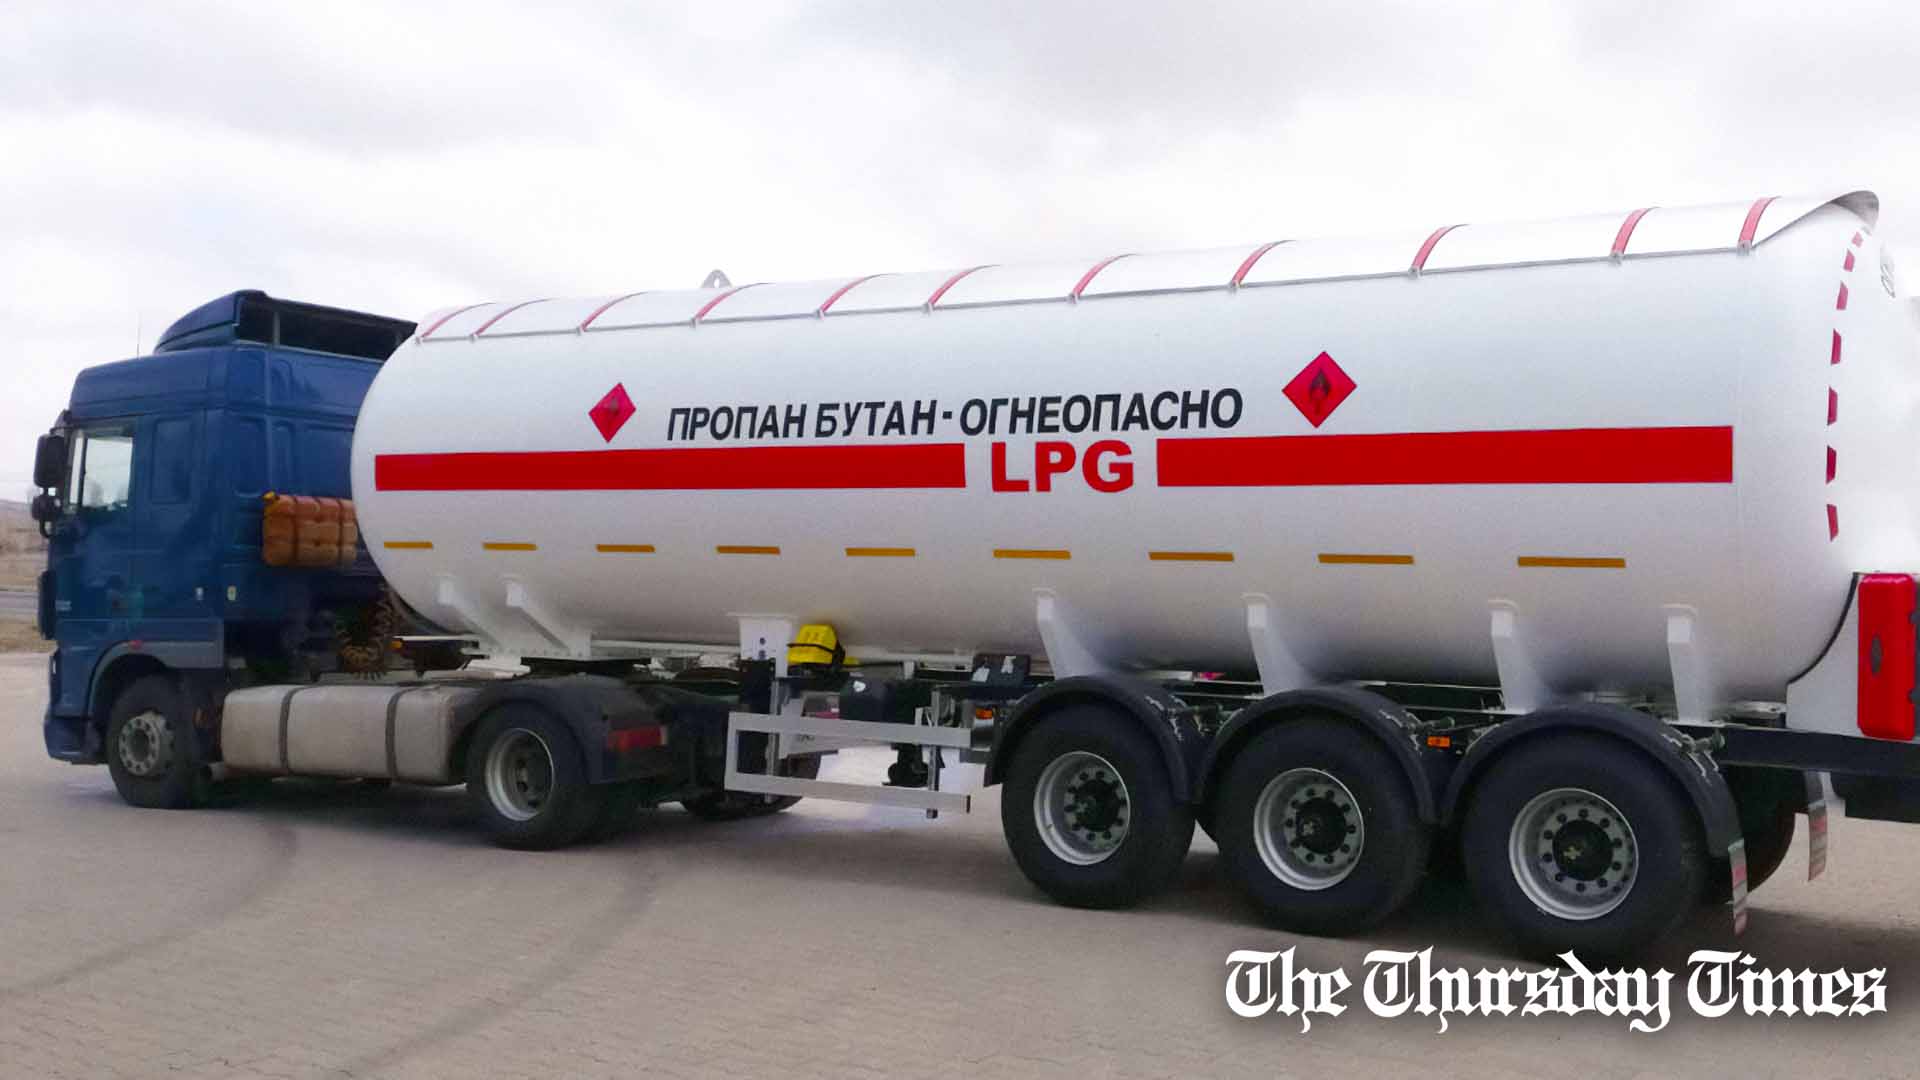 A file photo is shown of an LPG tanker. — FILE/THE THURSDAY TIMES